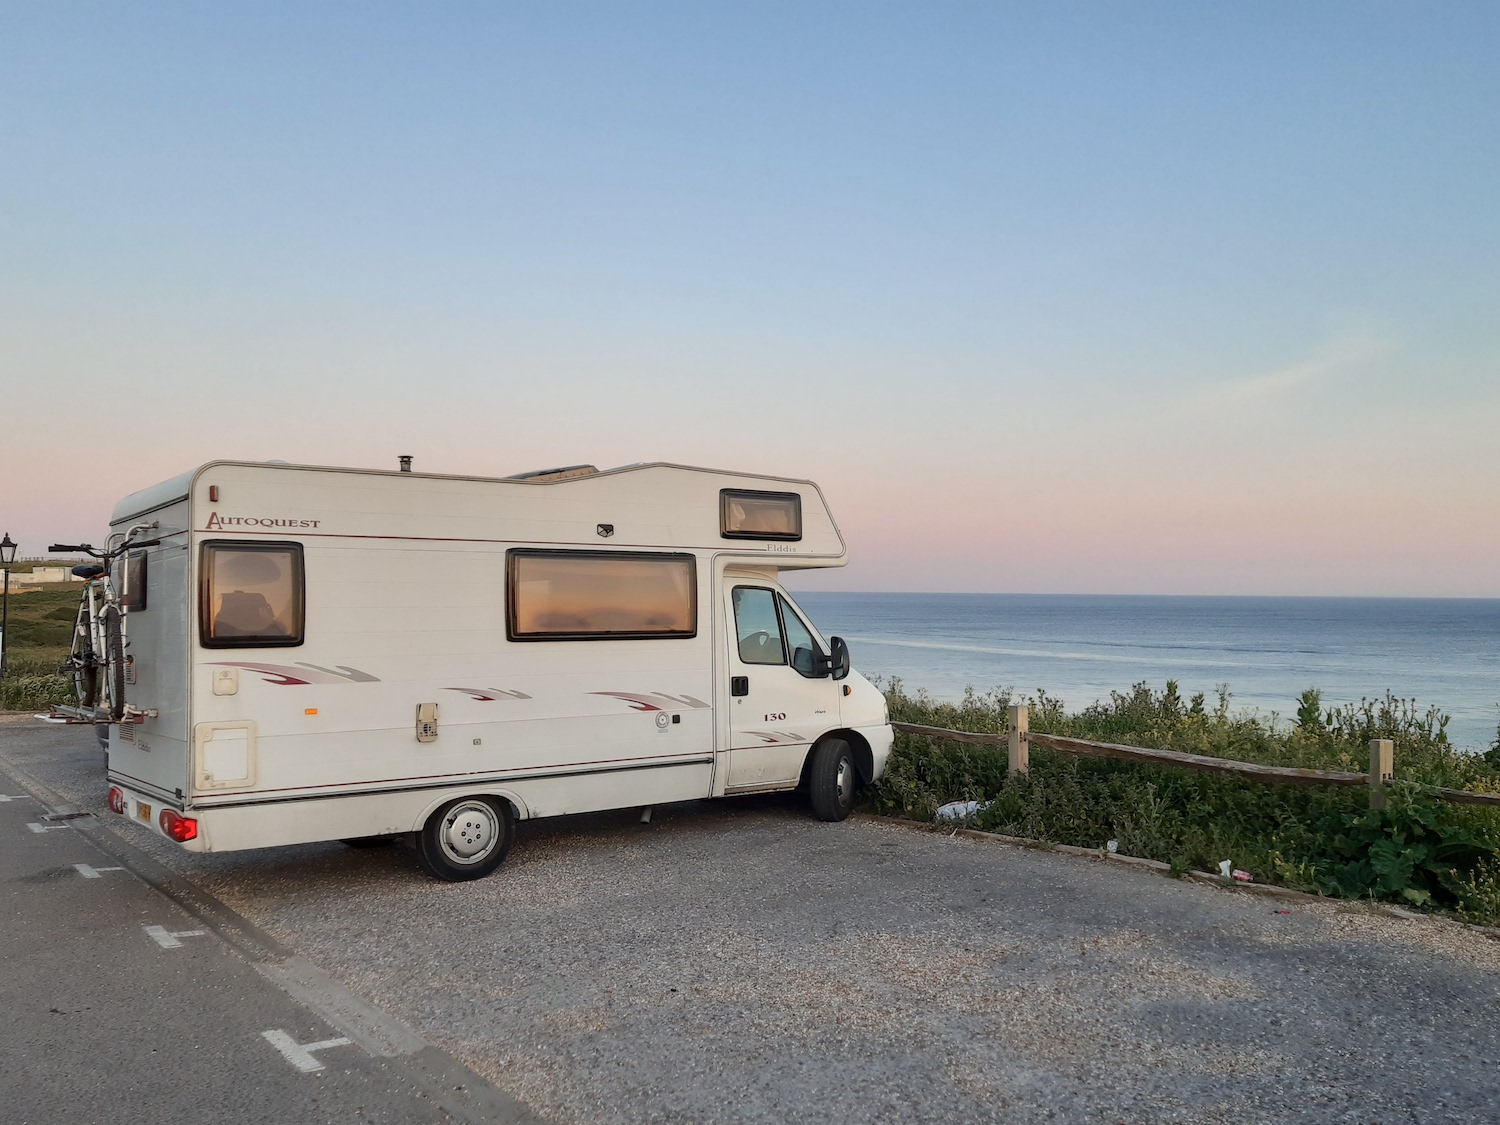 Isolation as a Traveler – Falling in Love with my Van Again